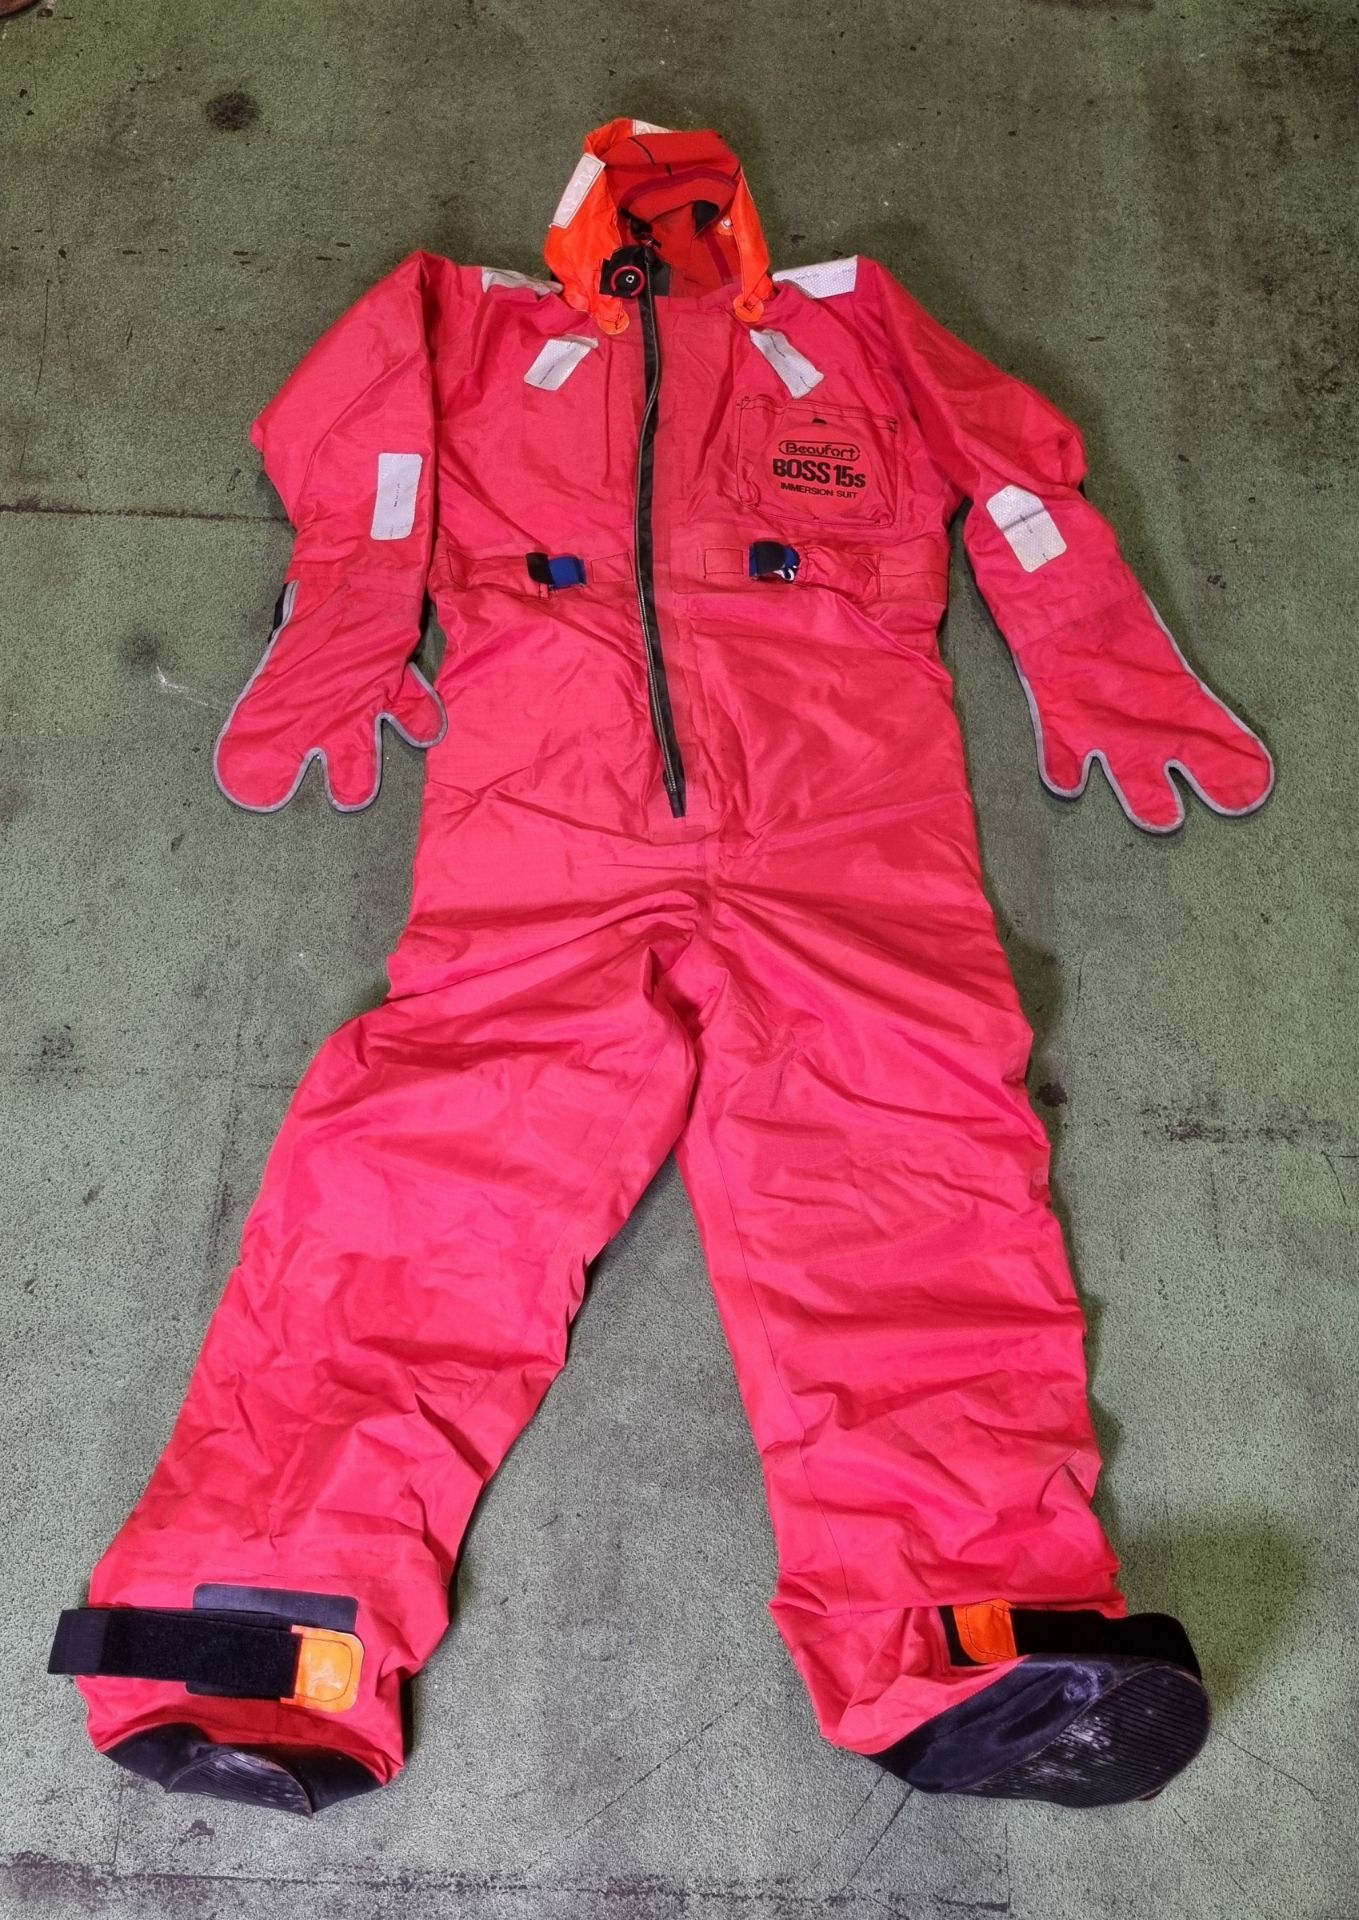 10x Beaufort offshore survival suits - UNCERTIFIED - NOT SAFETY TESTED - Image 2 of 4